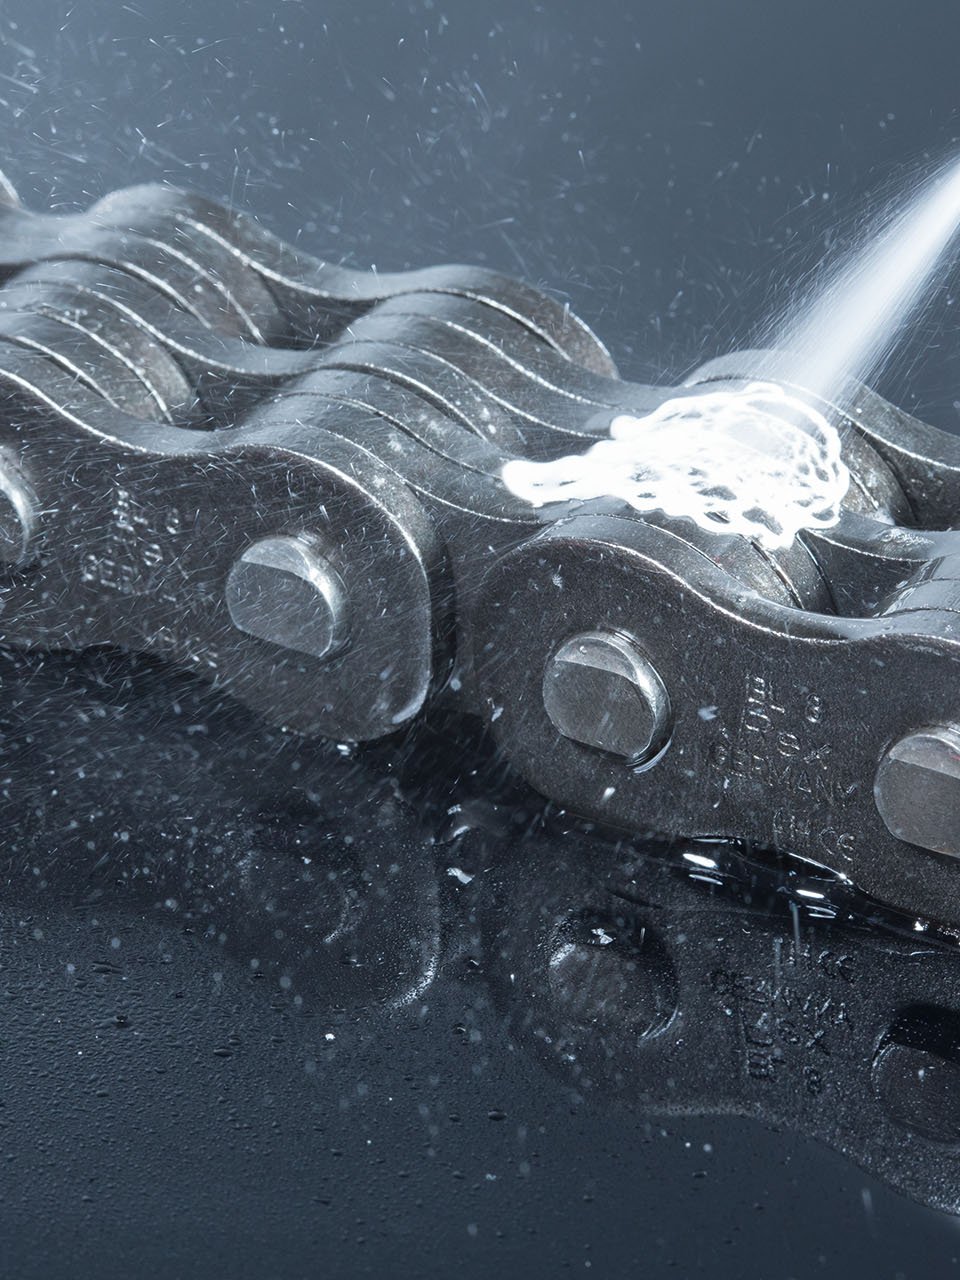 Chain oil is applied to chains